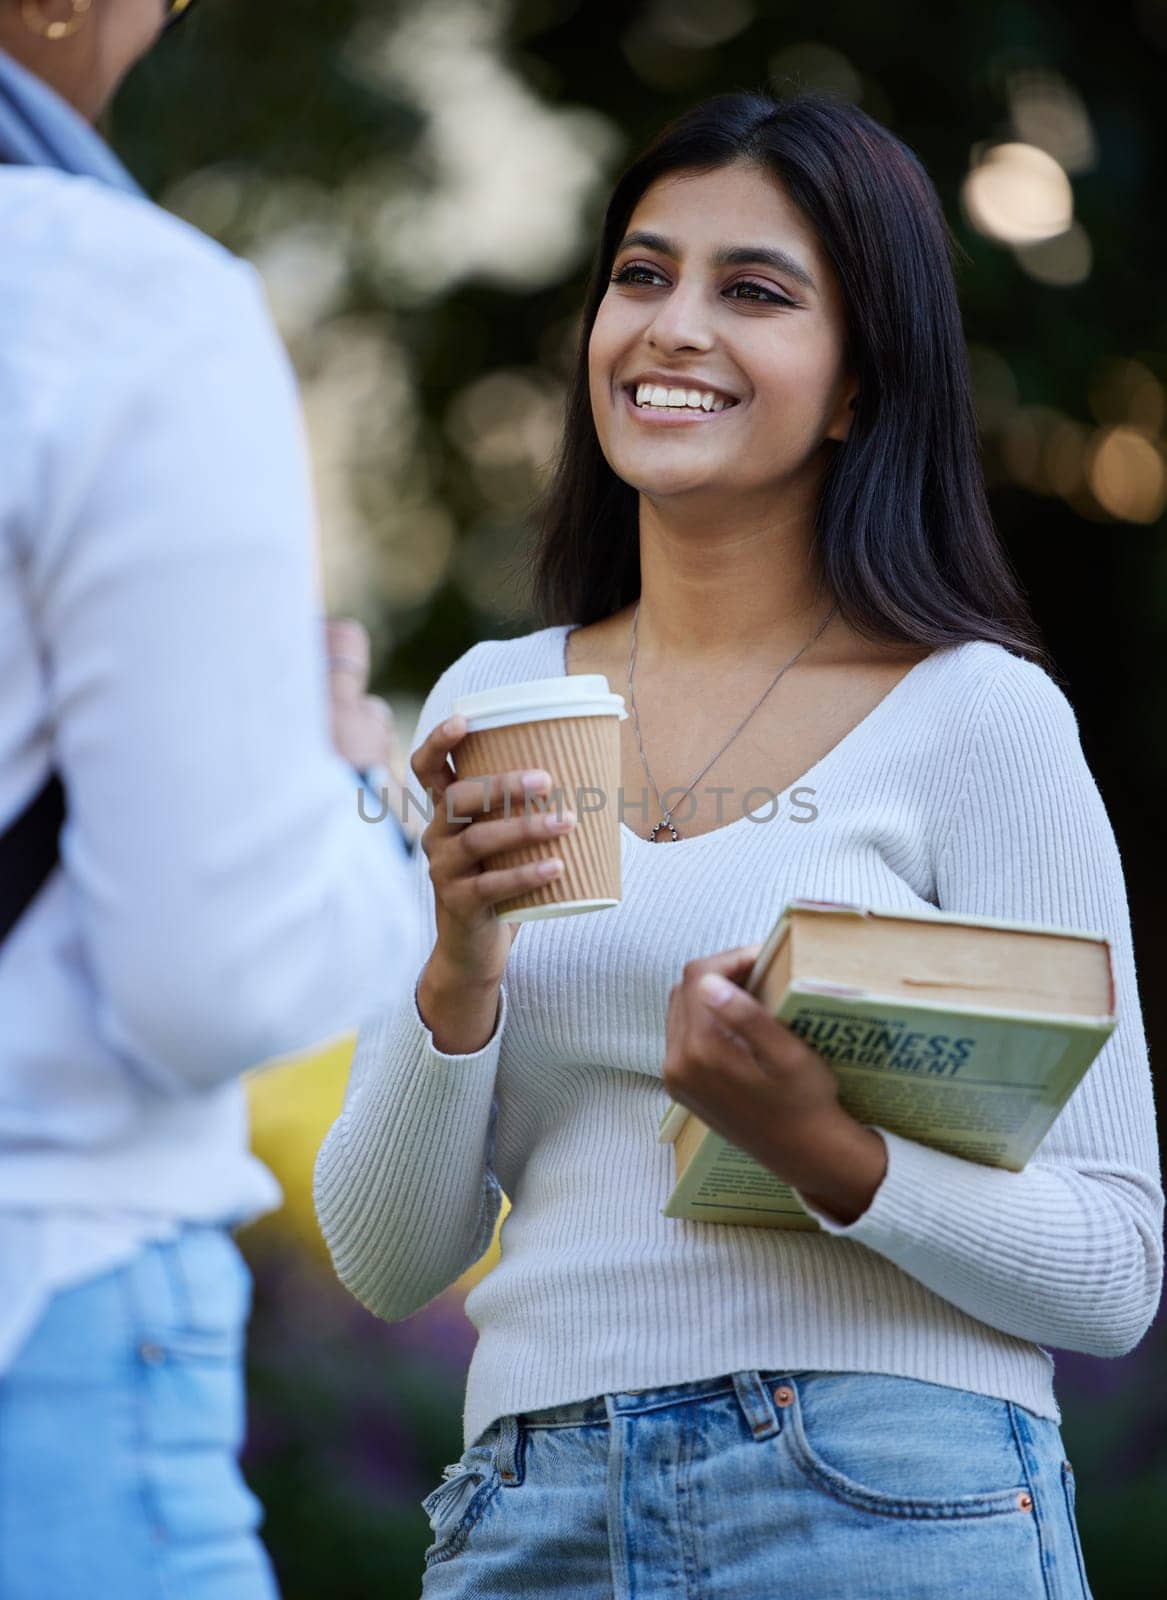 Smile, break or students talking at park on university campus for learning, education or books together. Girls talking, happy or students relax with coffee meeting for research or college knowledge.